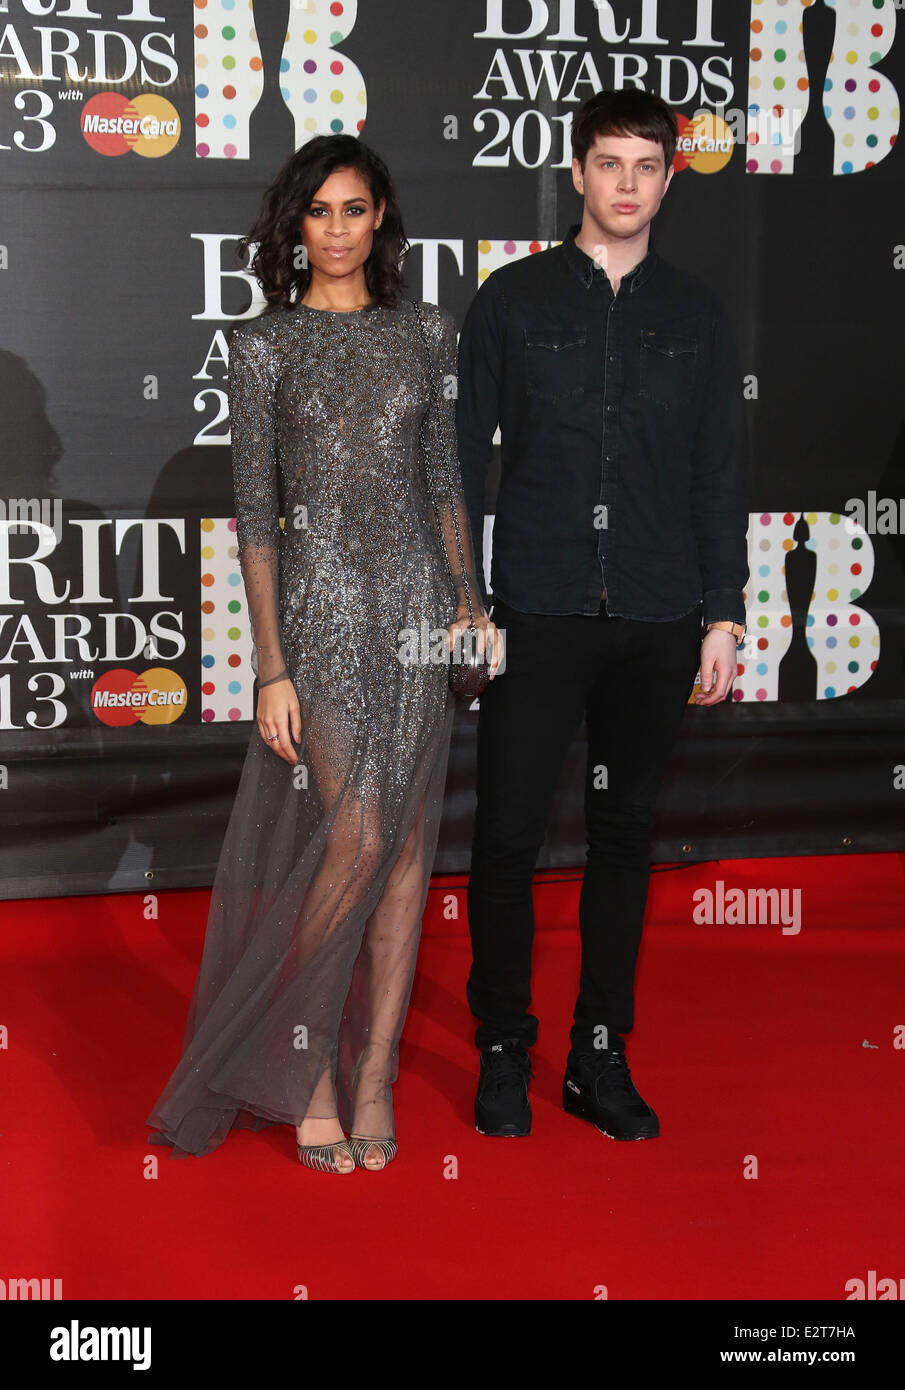 The 2013 Brit Awards (Brits) held at the O2 arena  Featuring: George Reid,Aluna Francis Where: London, United Kingdom When: 20 F Stock Photo